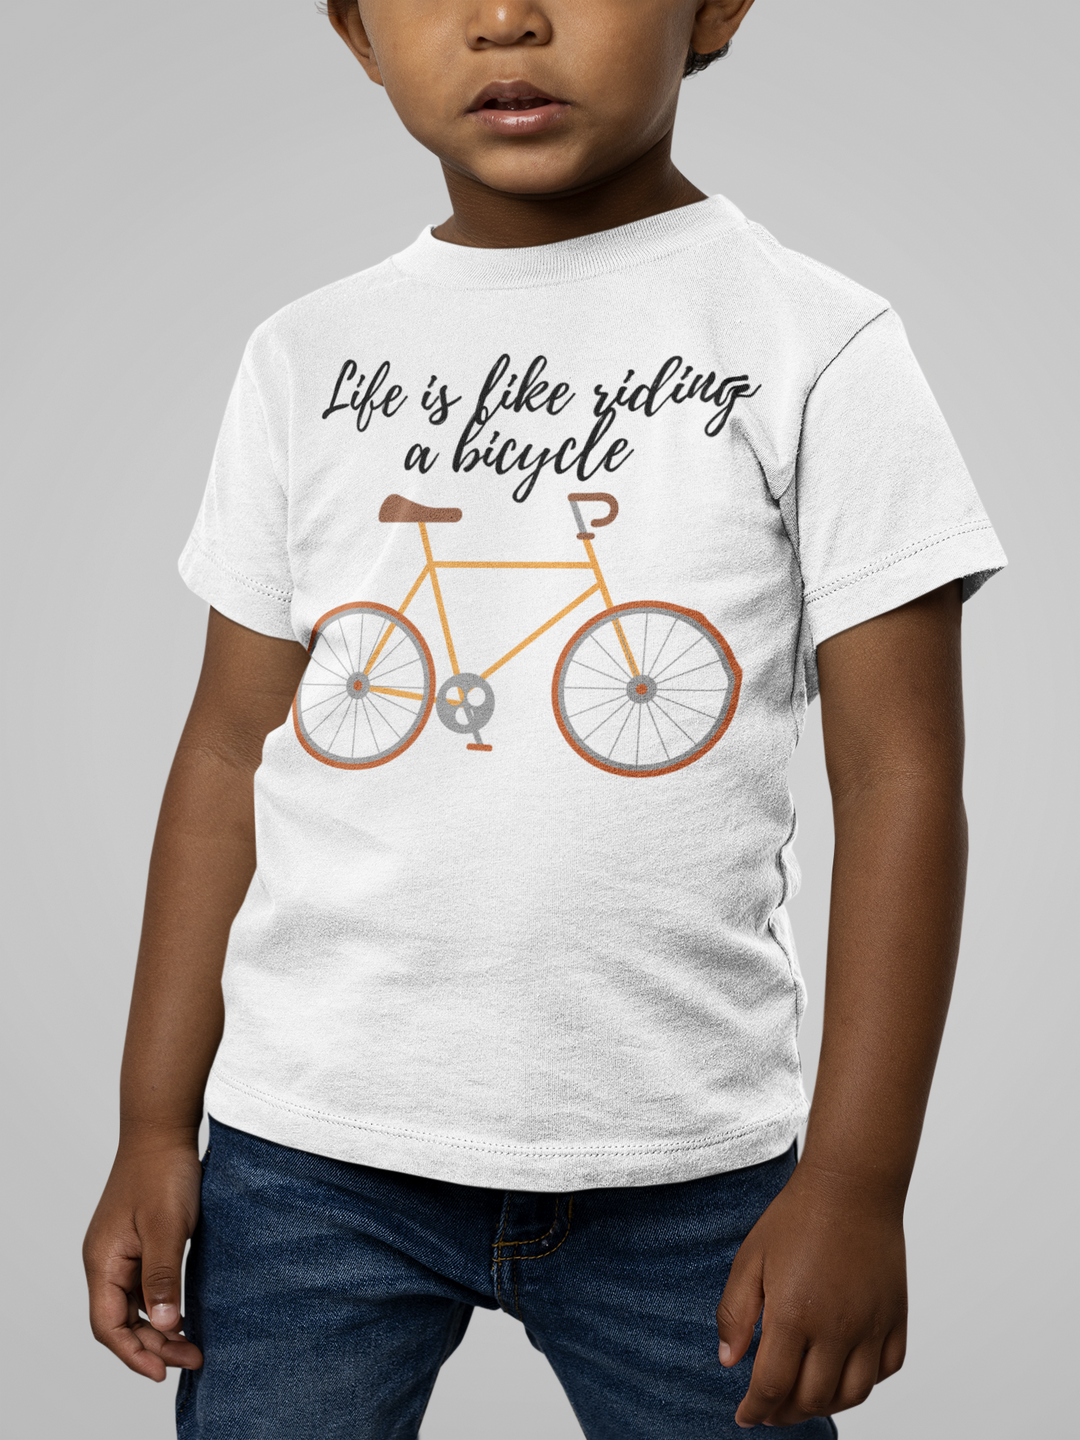 Life is like riding a bicycle. T-shirts for toddlers and kids up for a biking adventure. - TeesForToddlersandKids -  t-shirt - biking - life-is-like-riding-a-bicycle-short-sleeve-t-shirt-for-toddler-and-kids-the-biking-series